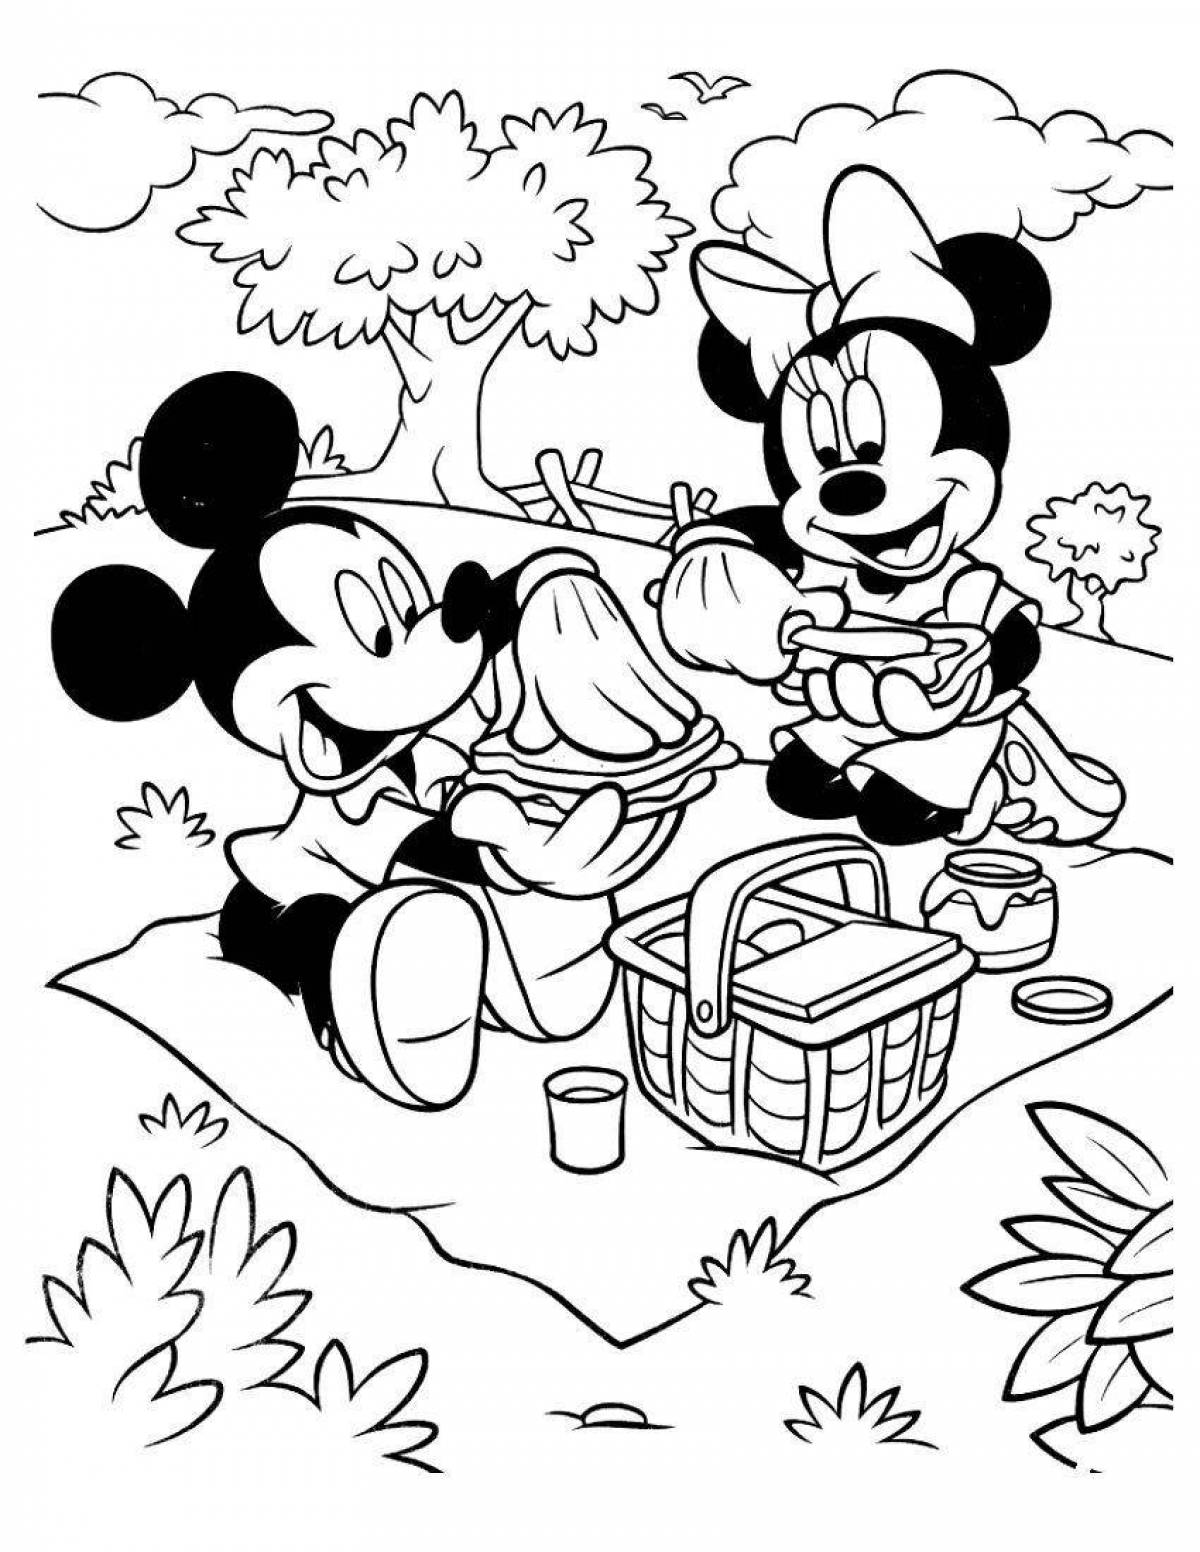 Amazing Minnie Mouse coloring book